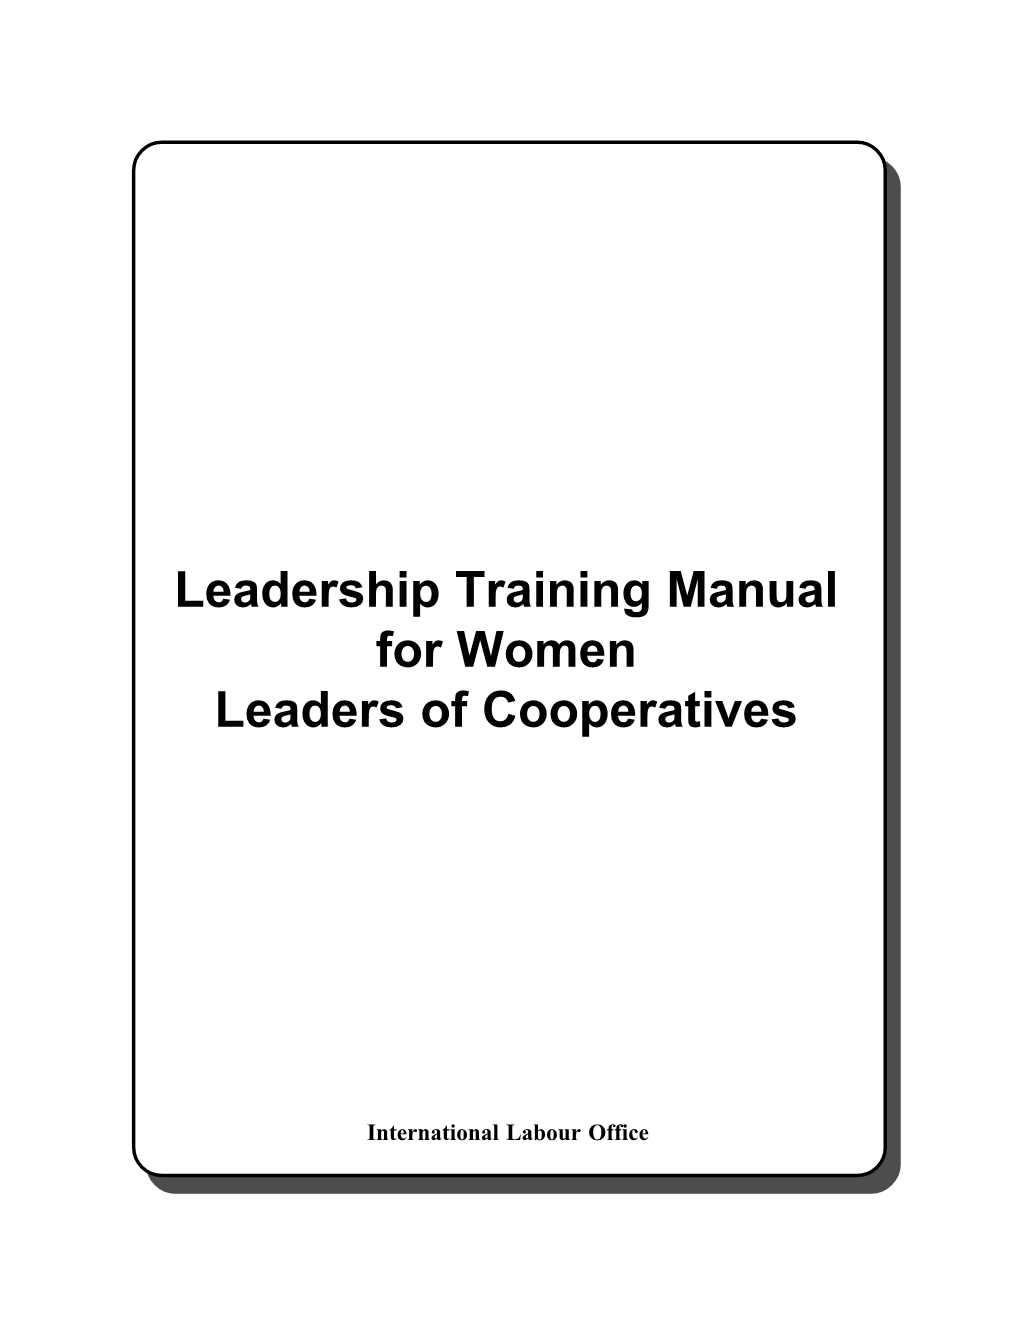 Leadership Training Manual for Women Leaders of Cooperatives